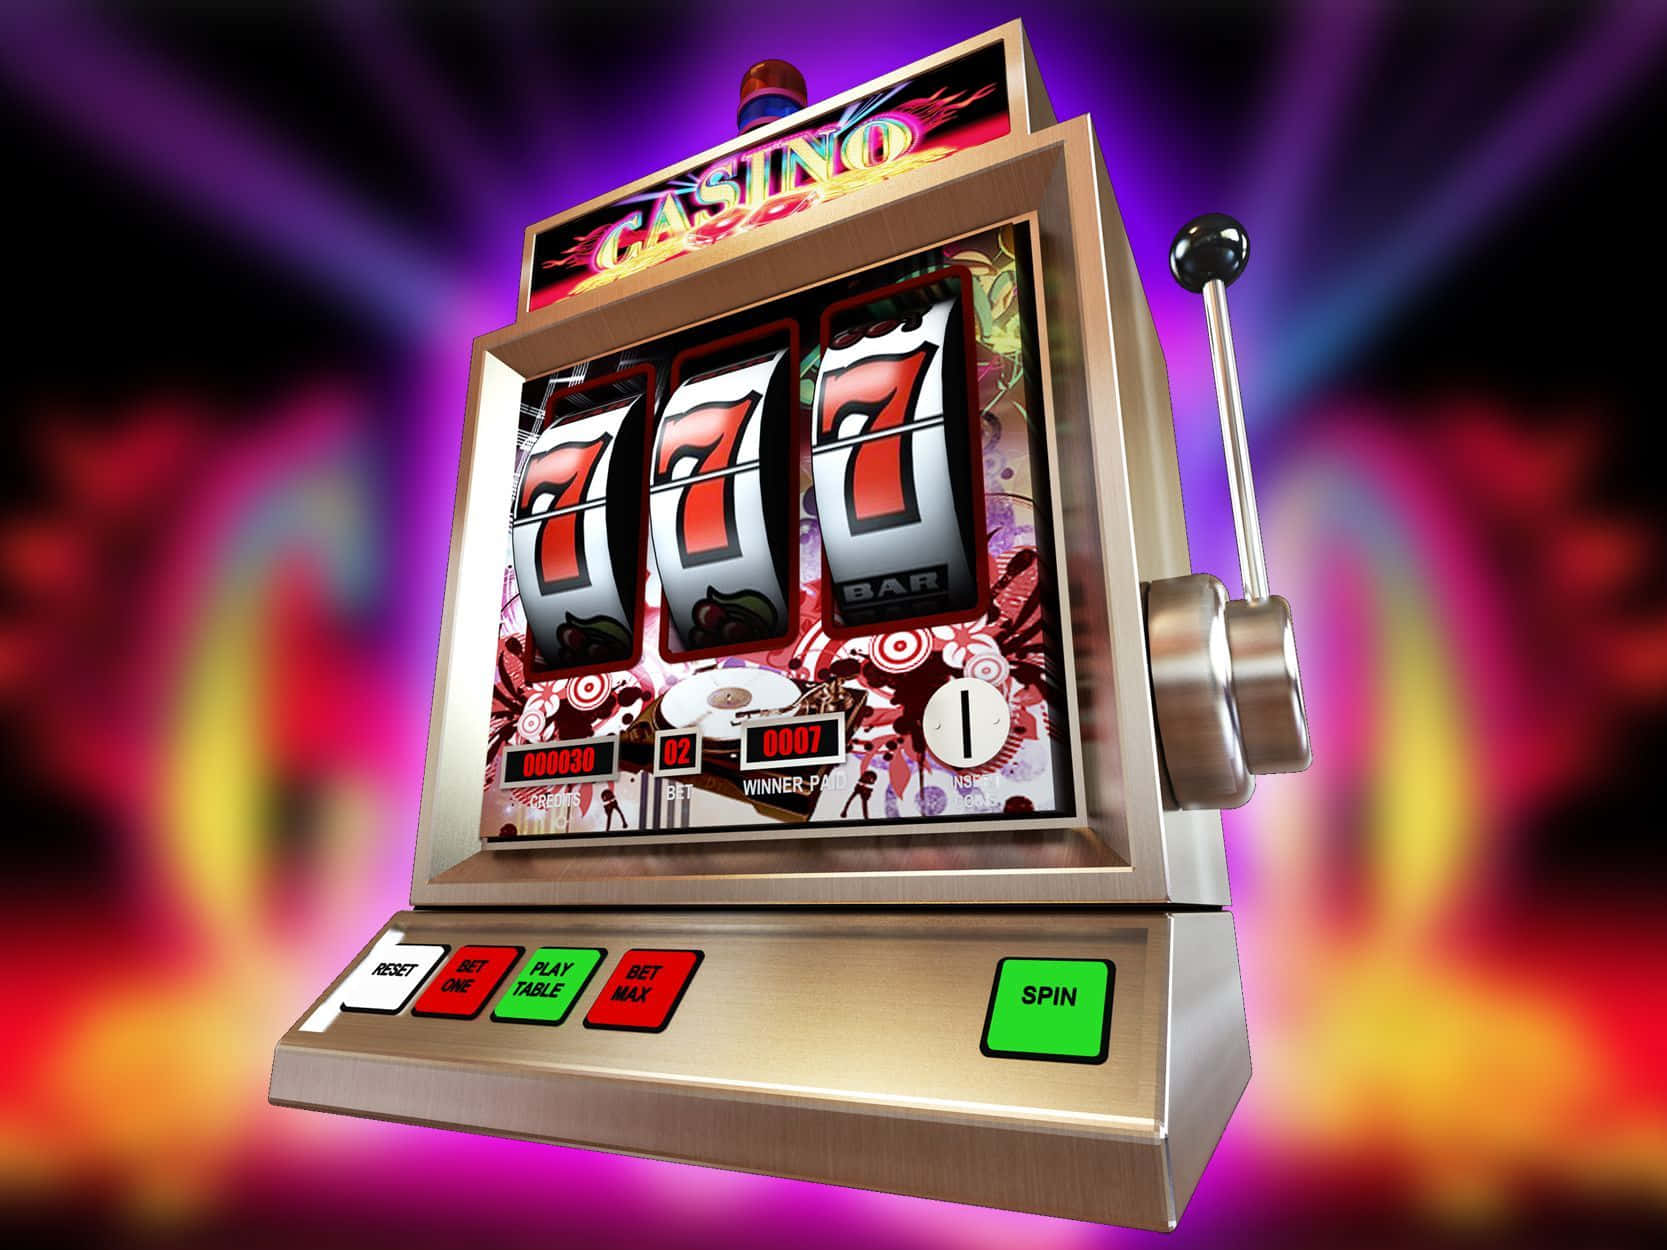 "Hit the jackpot with this classic and vibrant slot machine!"